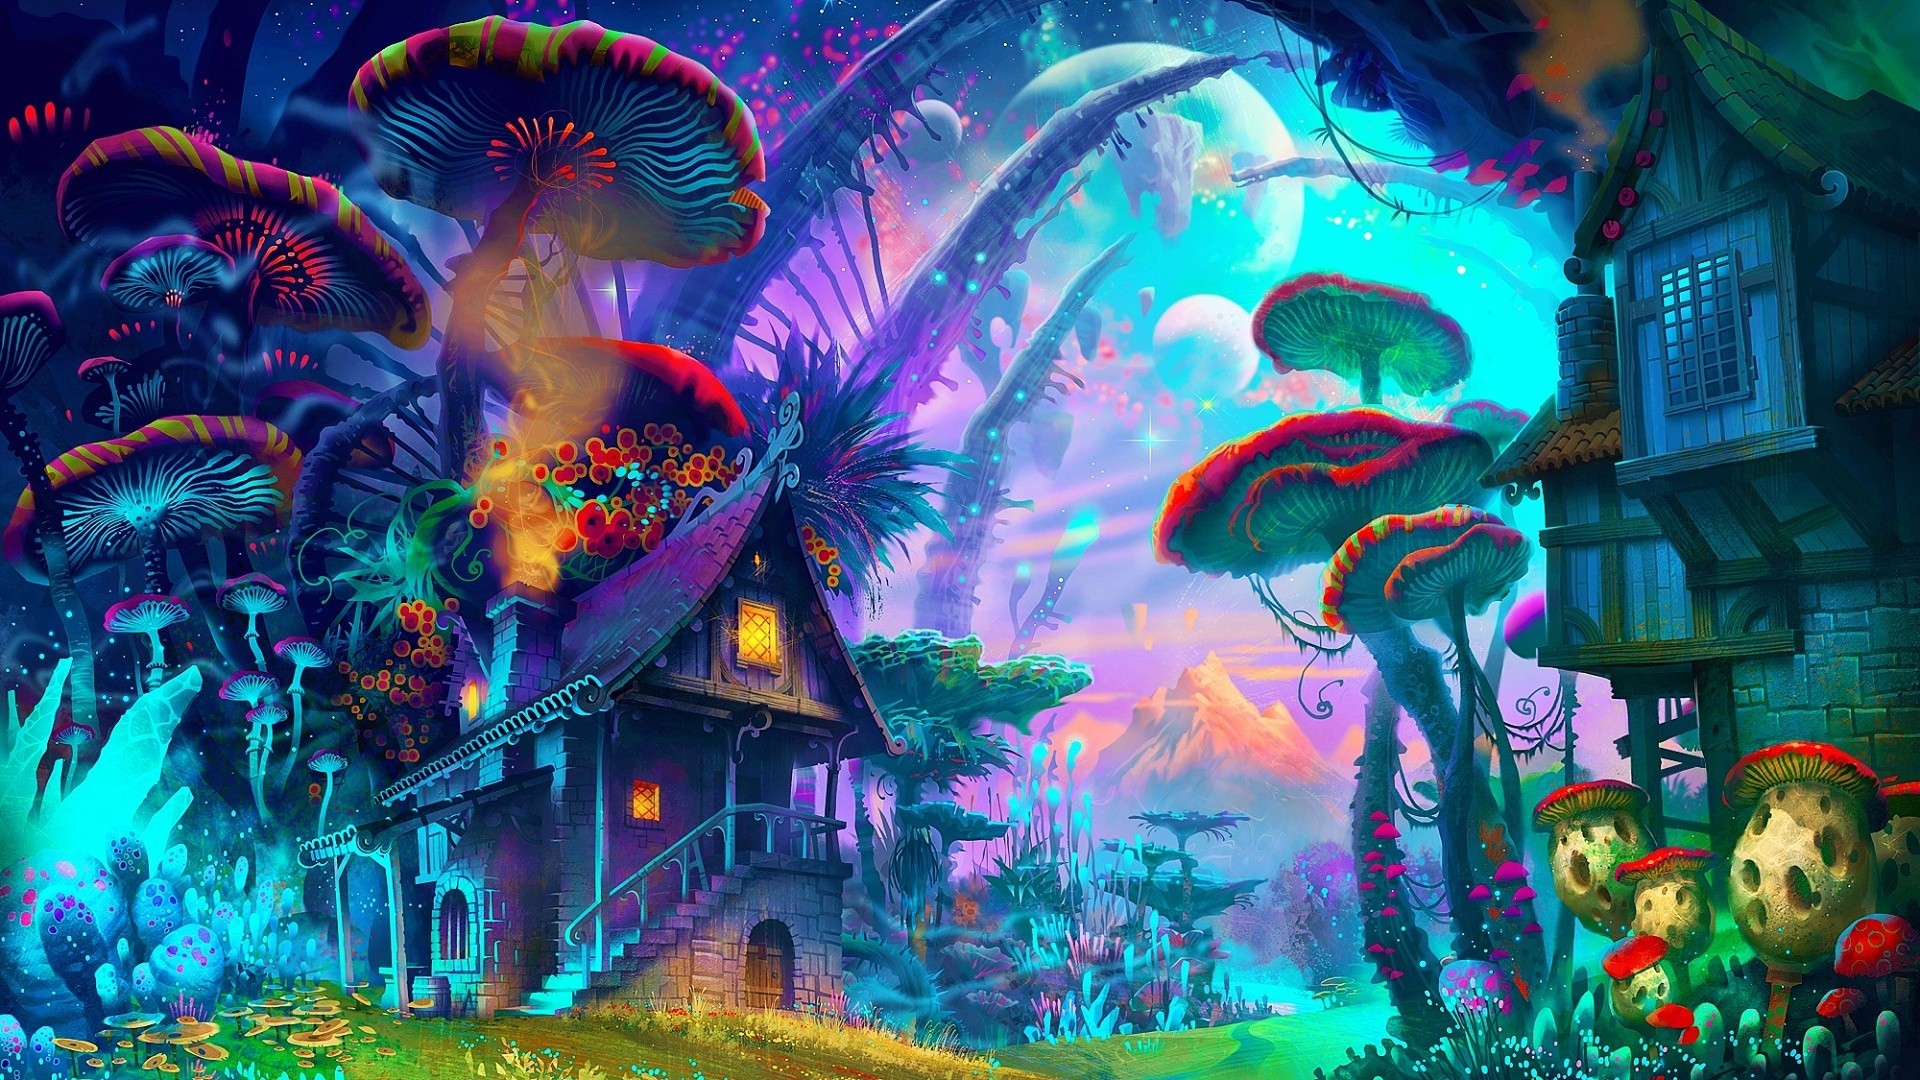 1920x1080 Magic Mushroom Live Wallpaper - Android Apps on Google Play ...